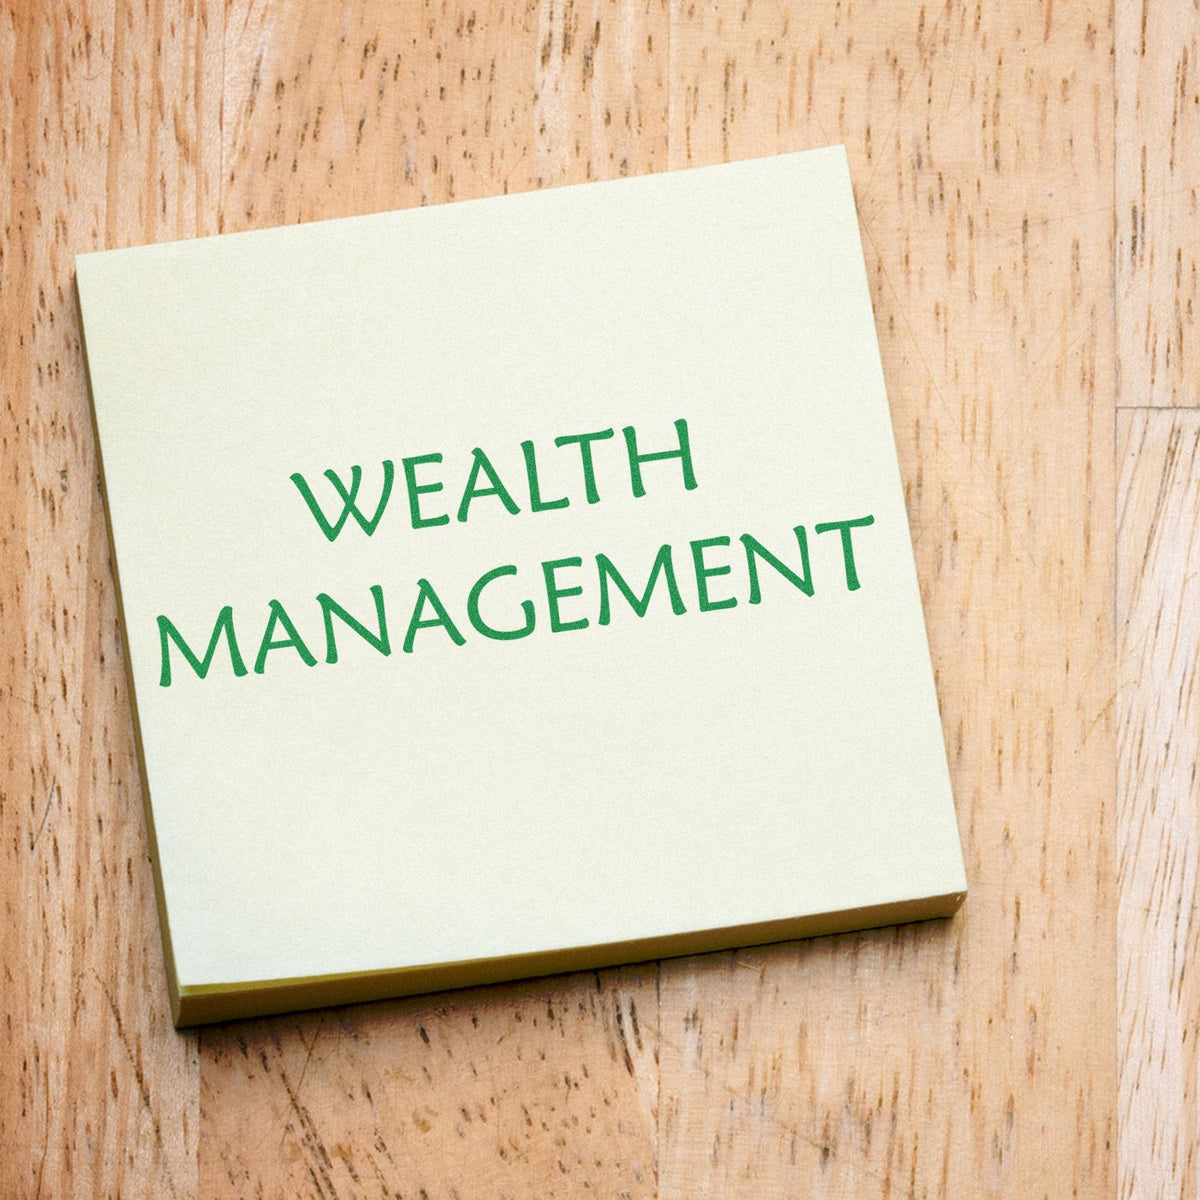 Large Wealth Management Rubber Stamp In Use